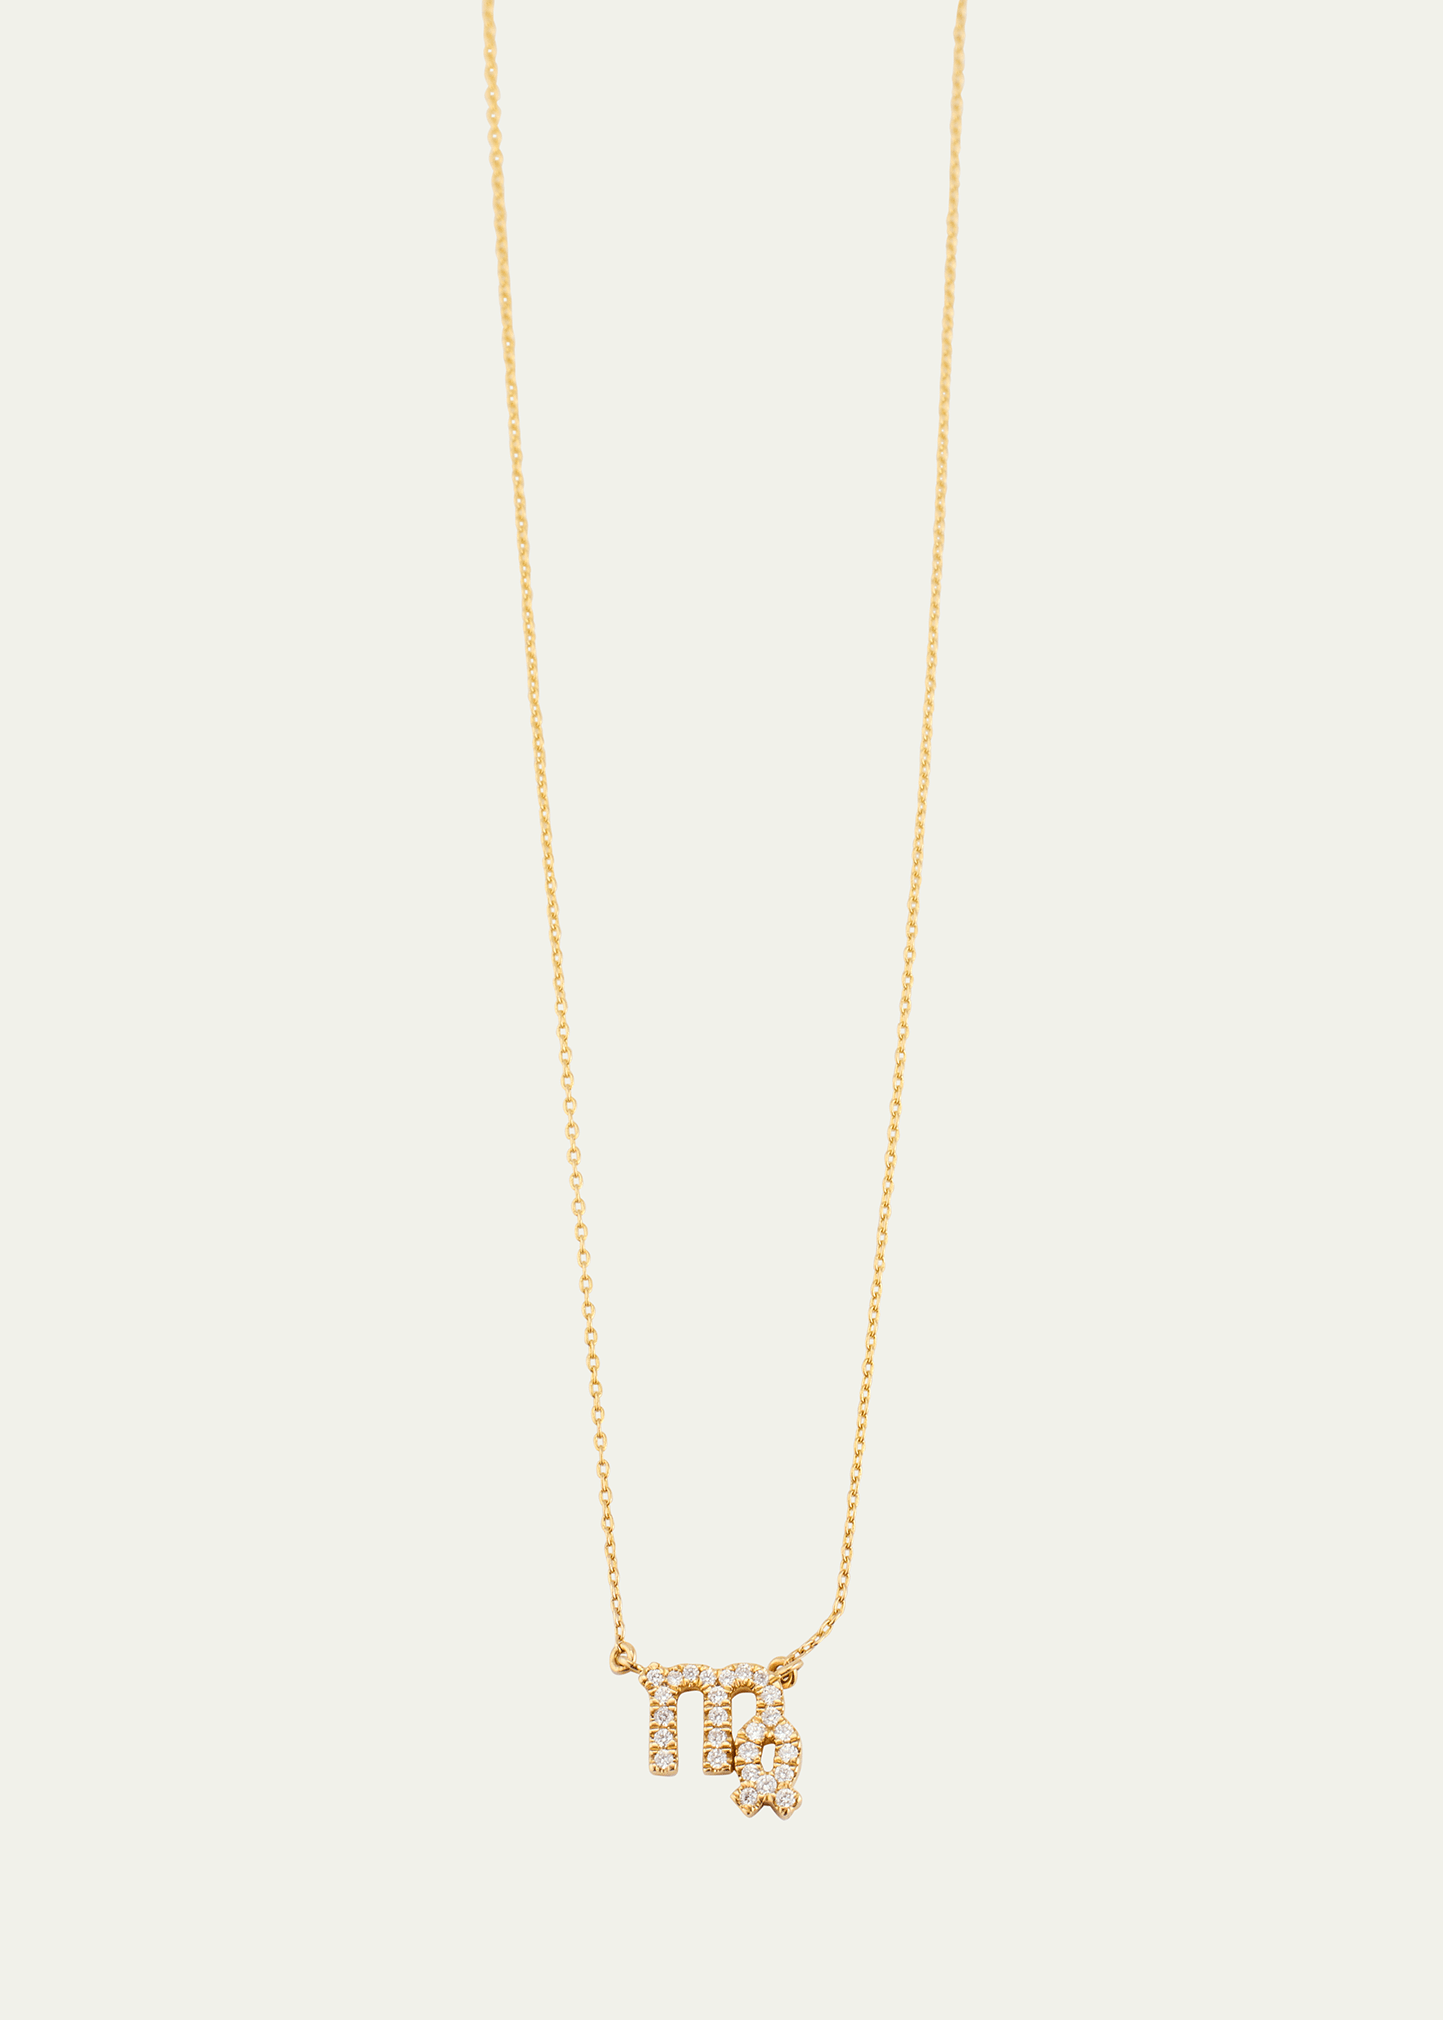 Star Sign Necklace, Virgo, in Yellow Gold and White Diamonds